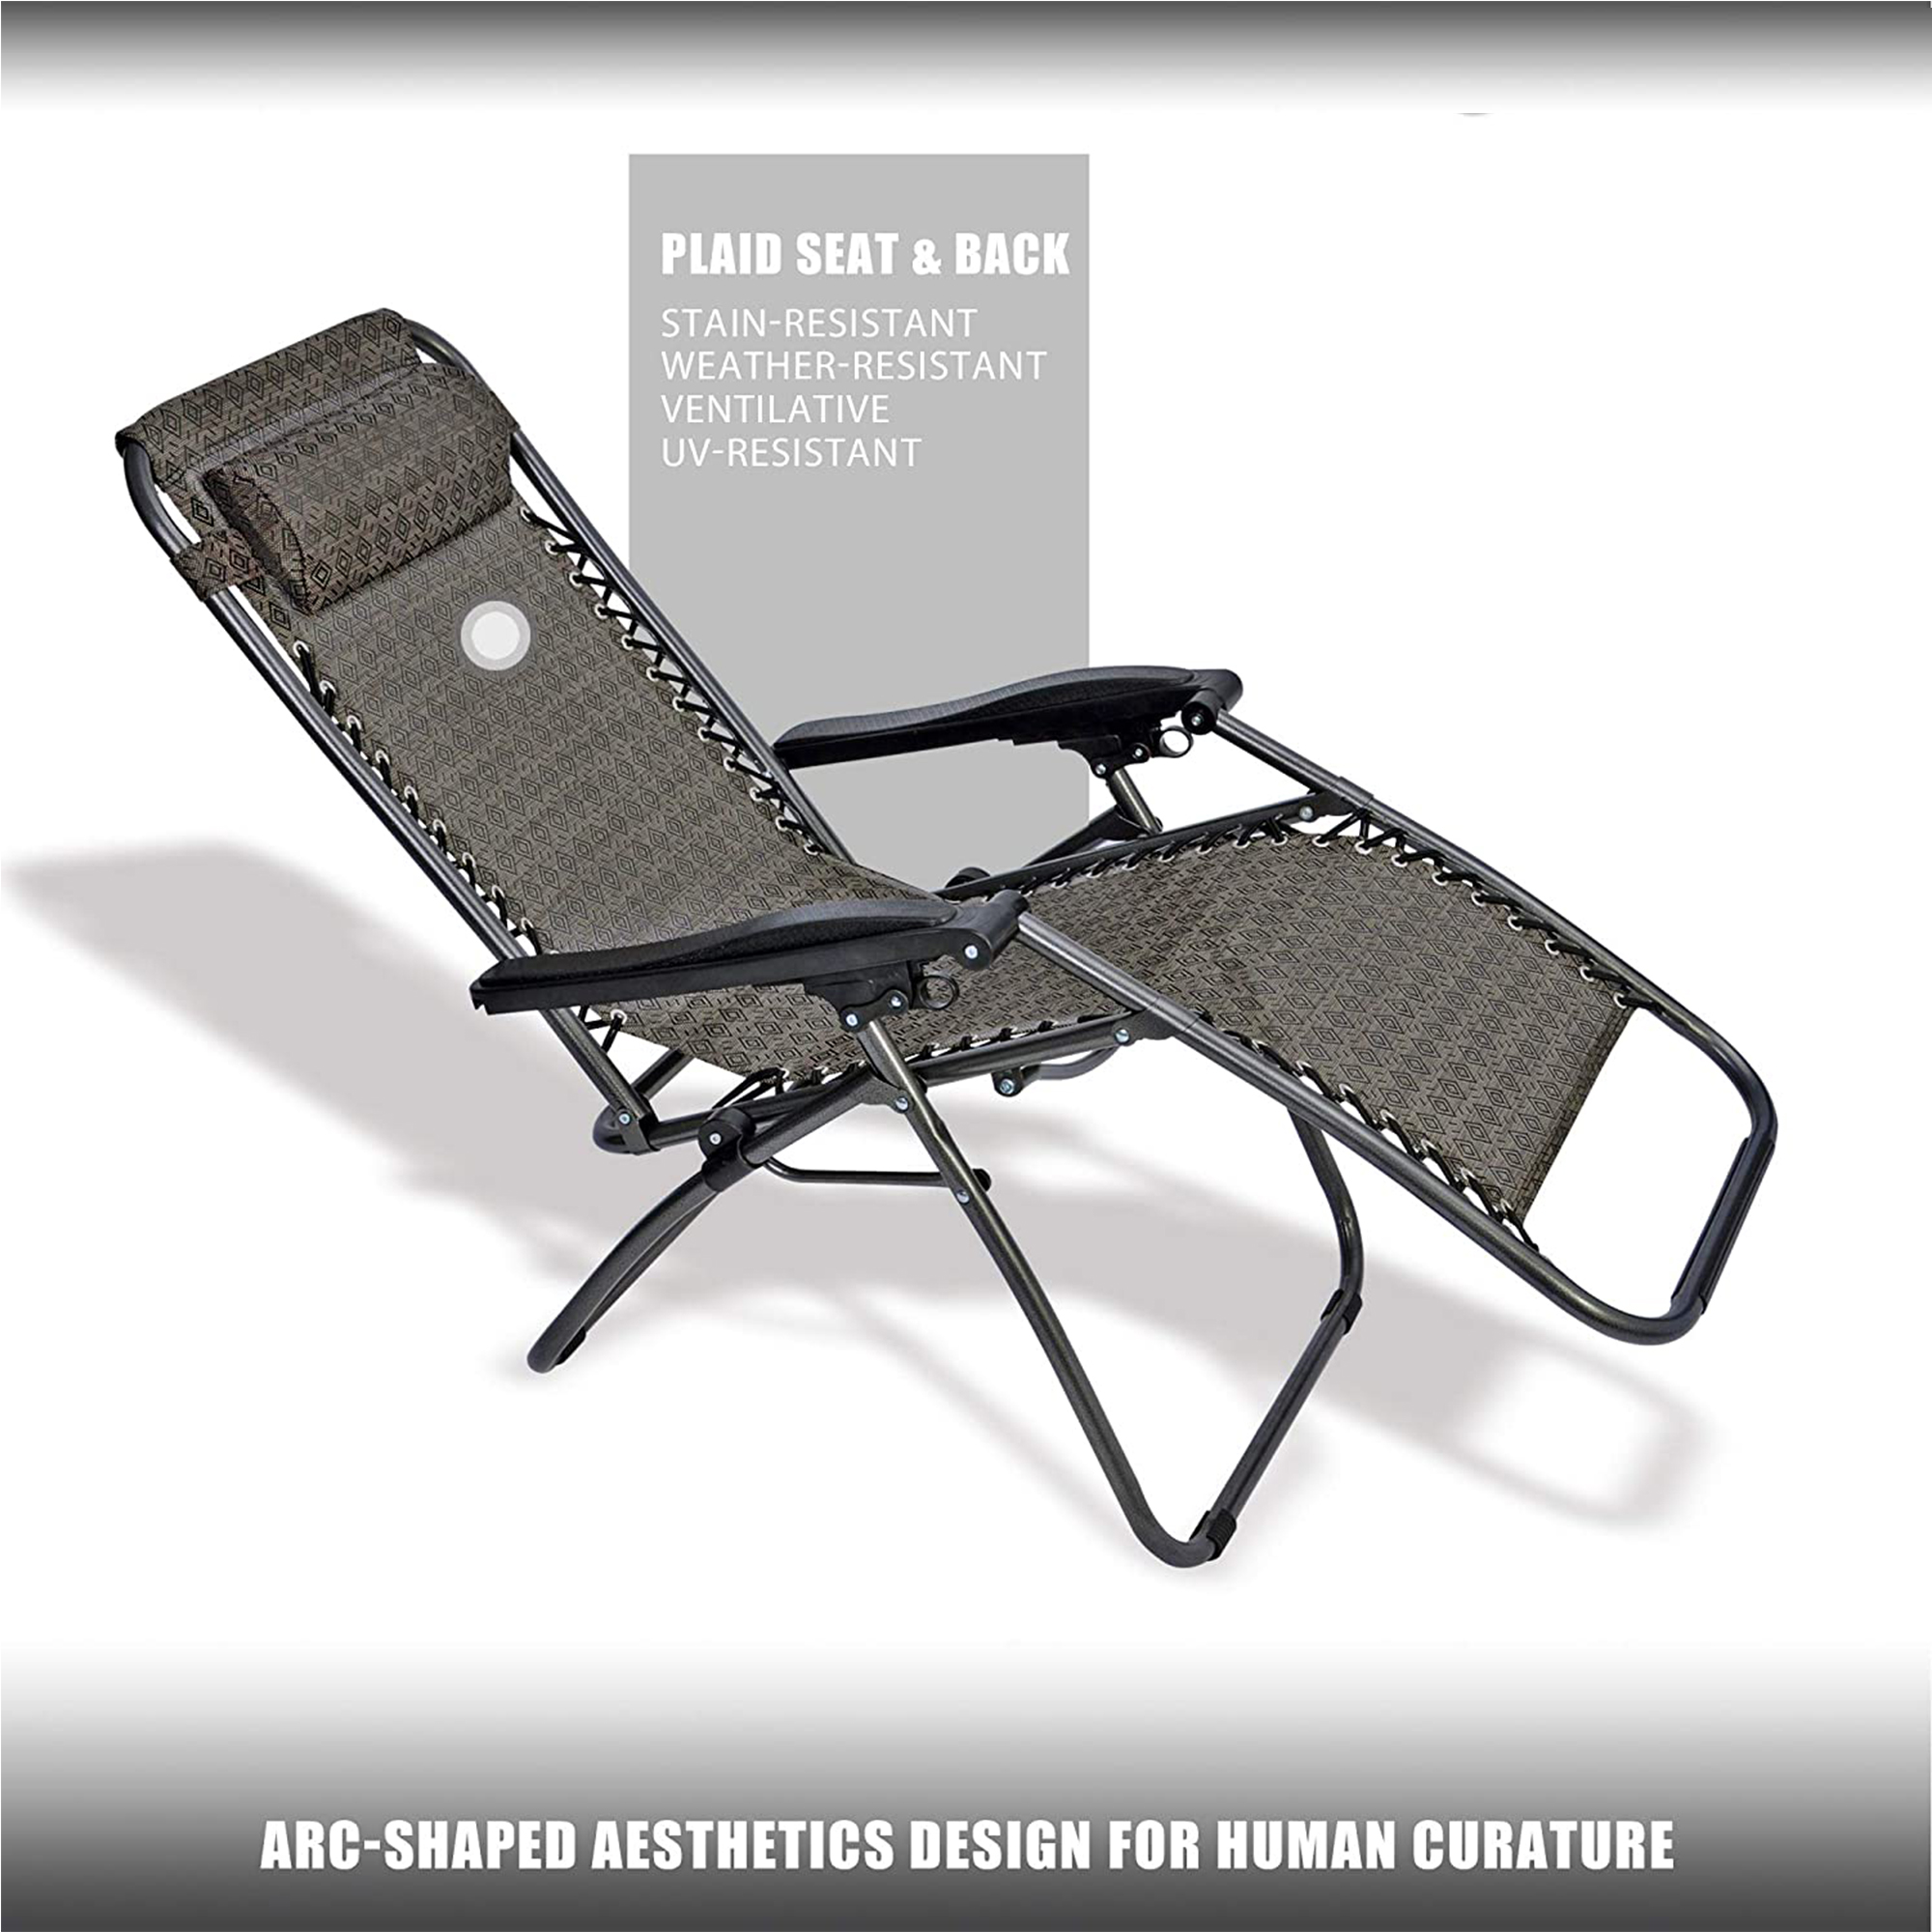 KARMAS PRODUCT 2-pack Zero Gravity Chair Chaise Lounge Chairs Folding Adjustable Recliners Outdoor Patio Lawn Pool Beach Chair, Support 300 Lbs - image 2 of 7